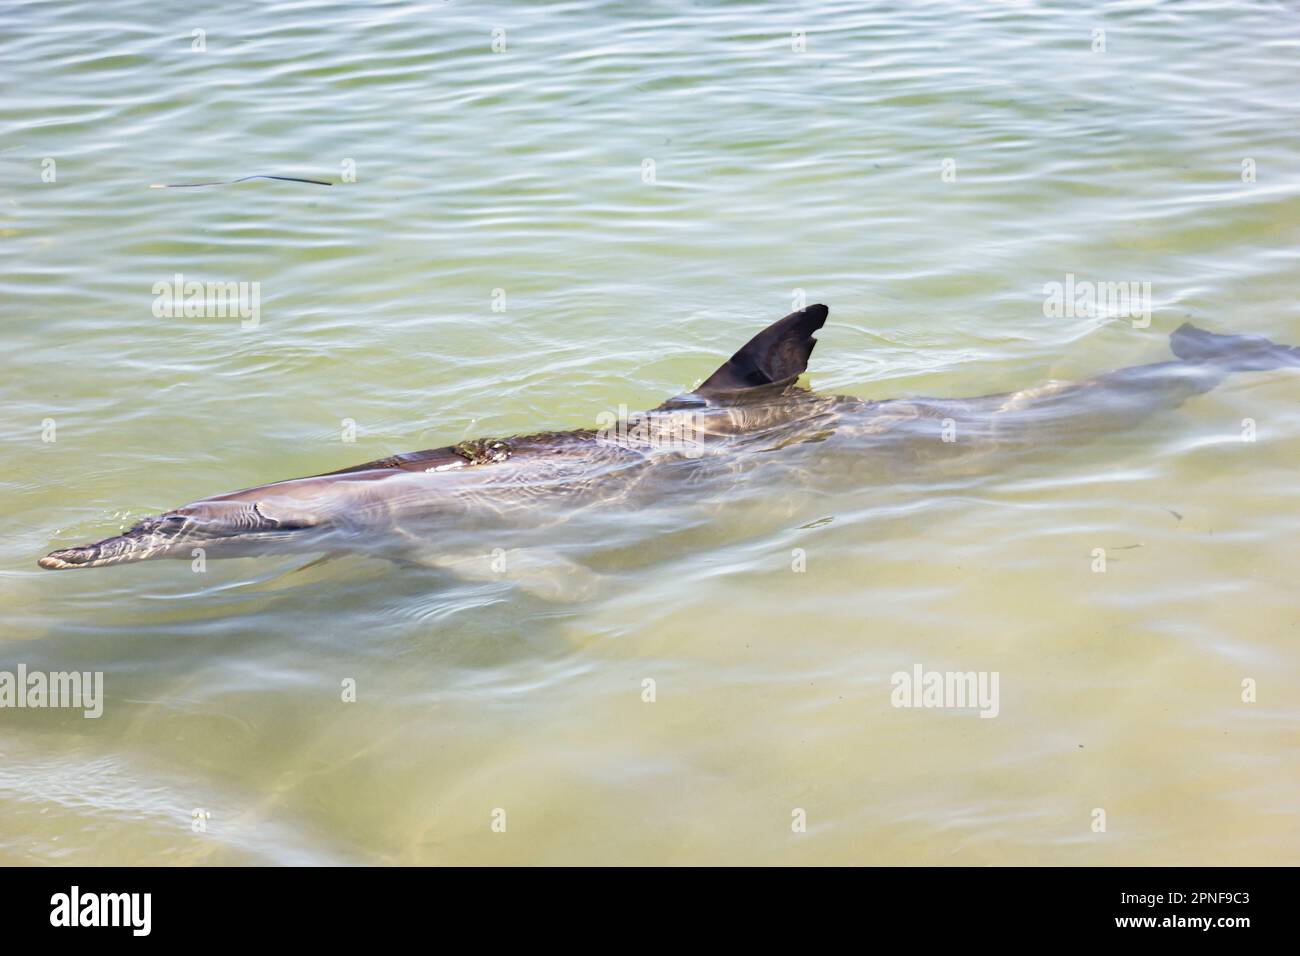 A dolphin swimming in the shallow water of Monkey Mia in Shark Bay of Western Australia, Australia. Stock Photo